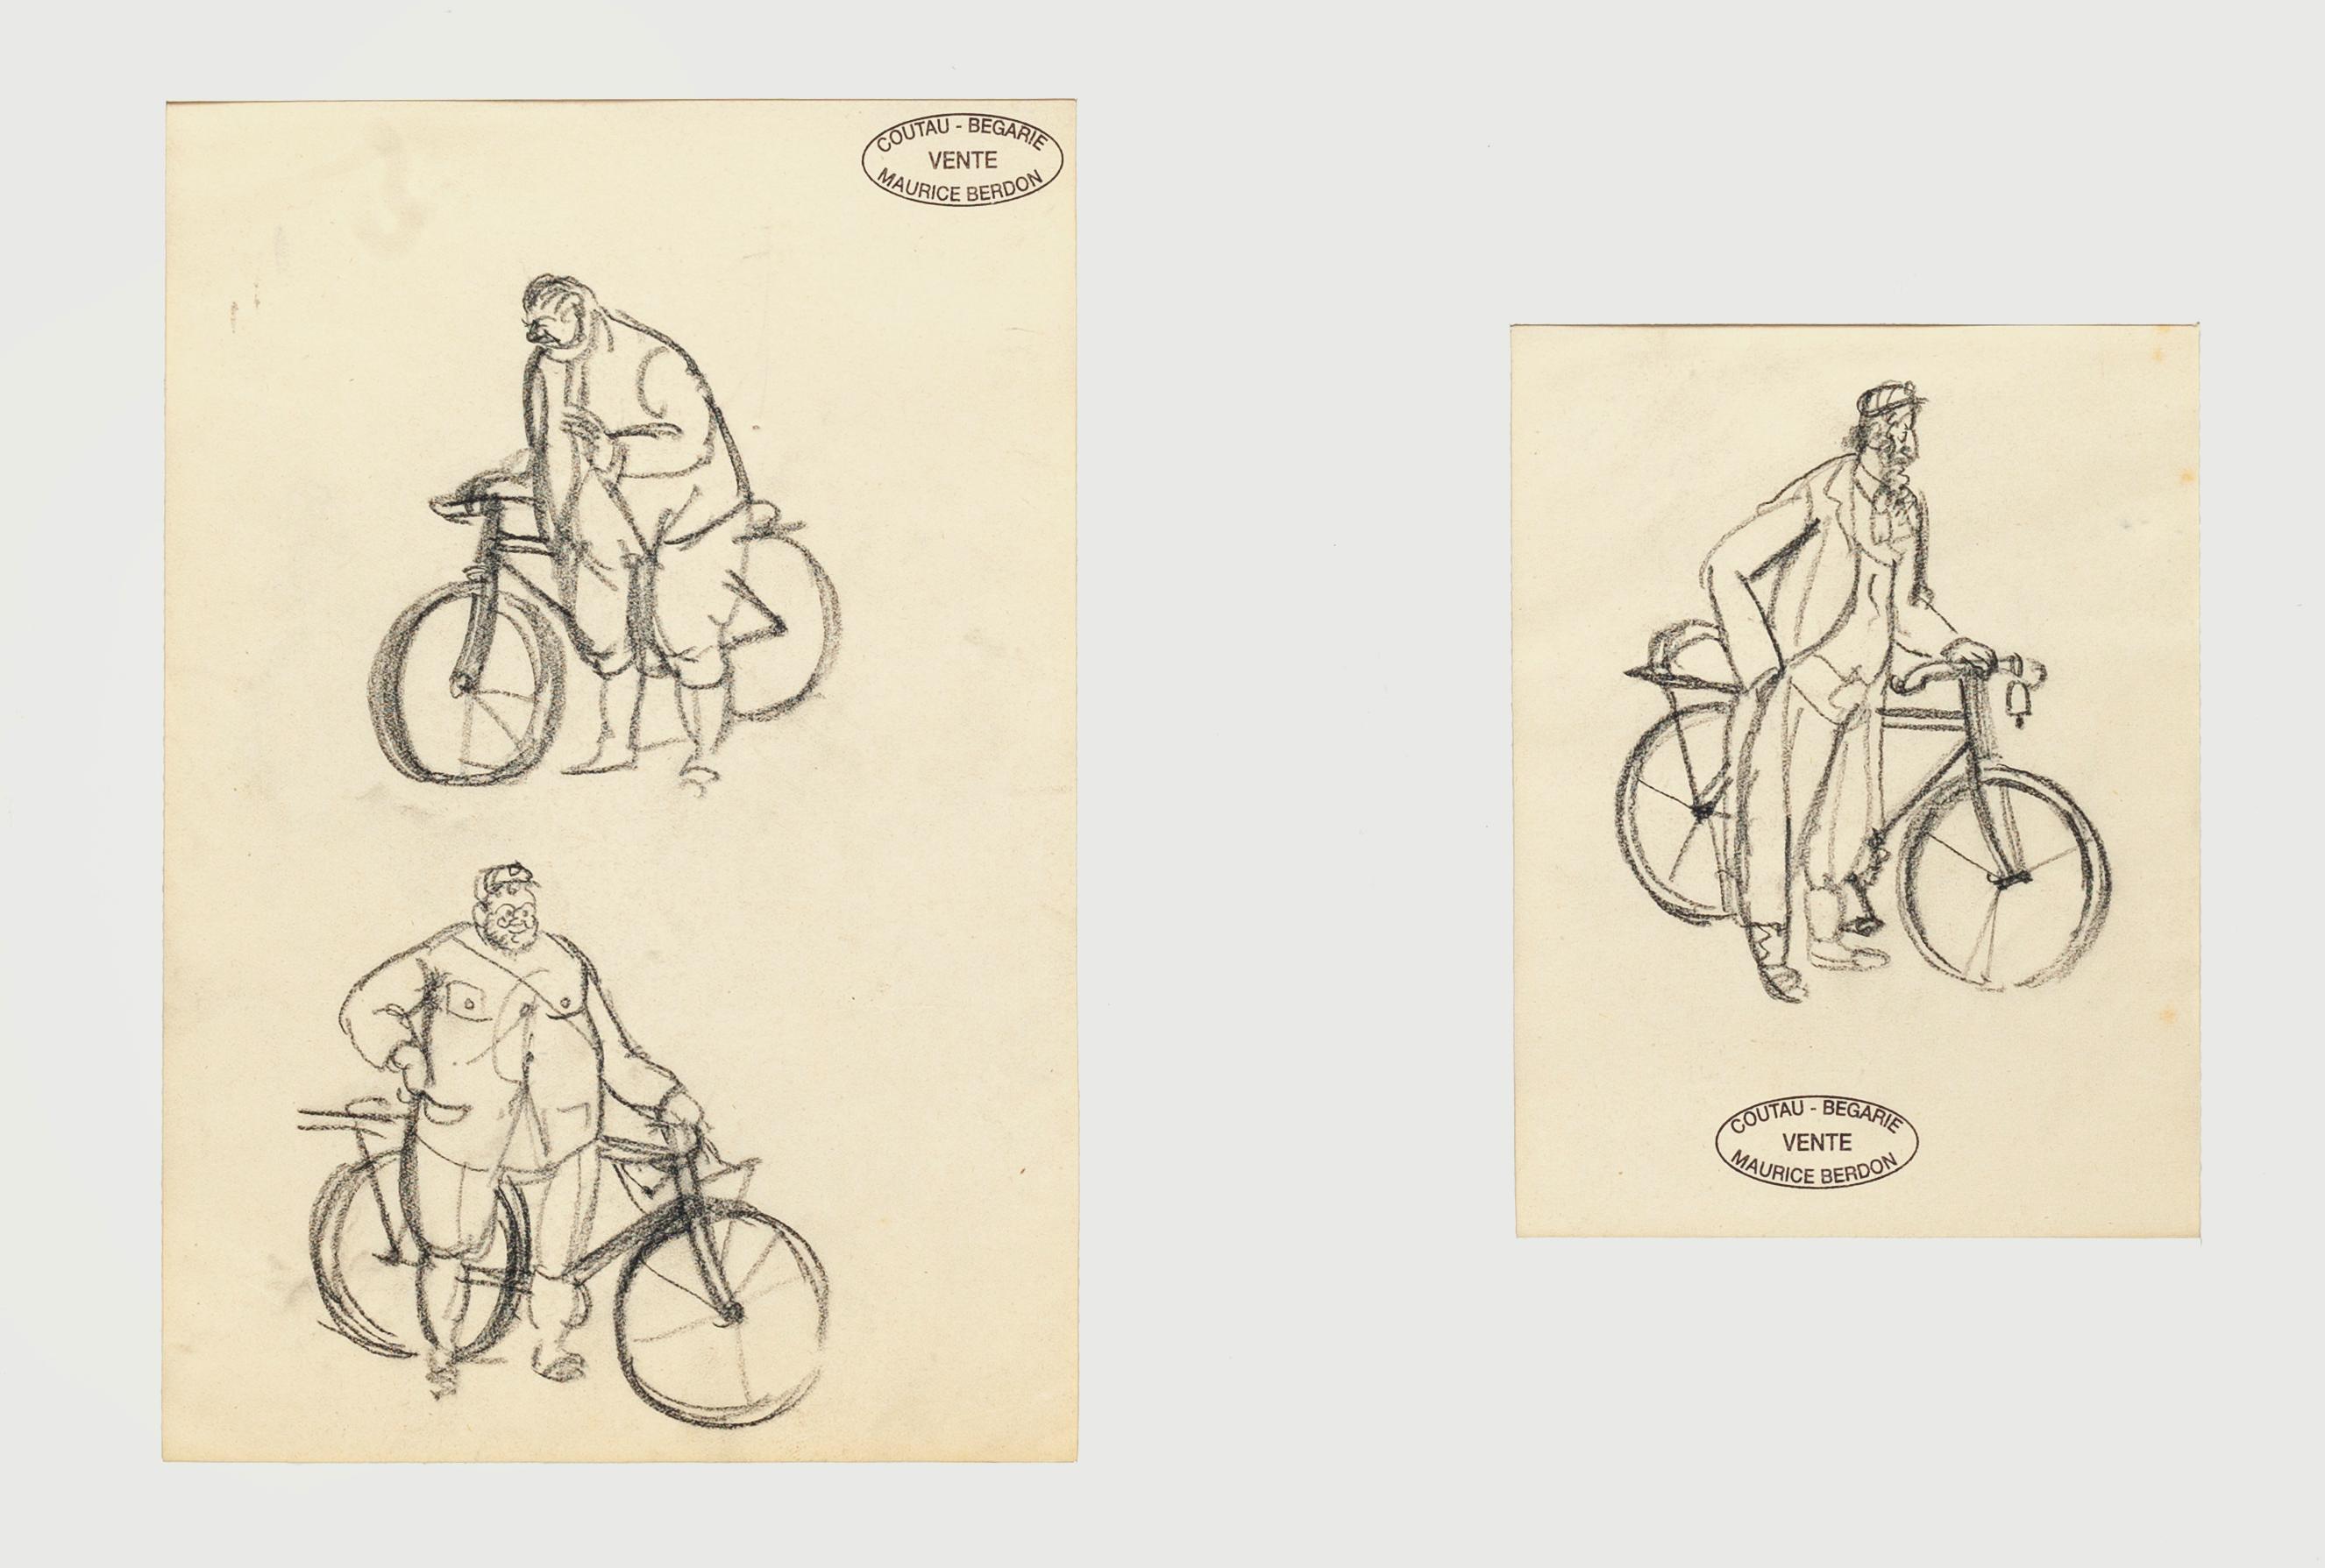 Bikers is a composition of two beautiful drawings each with a different dimension, in pencil, realized by the artist Maurice Berdon. With the stamp of the artist on it. The state of preservation is excellent.

The white Passepartiut dimension: 51 x